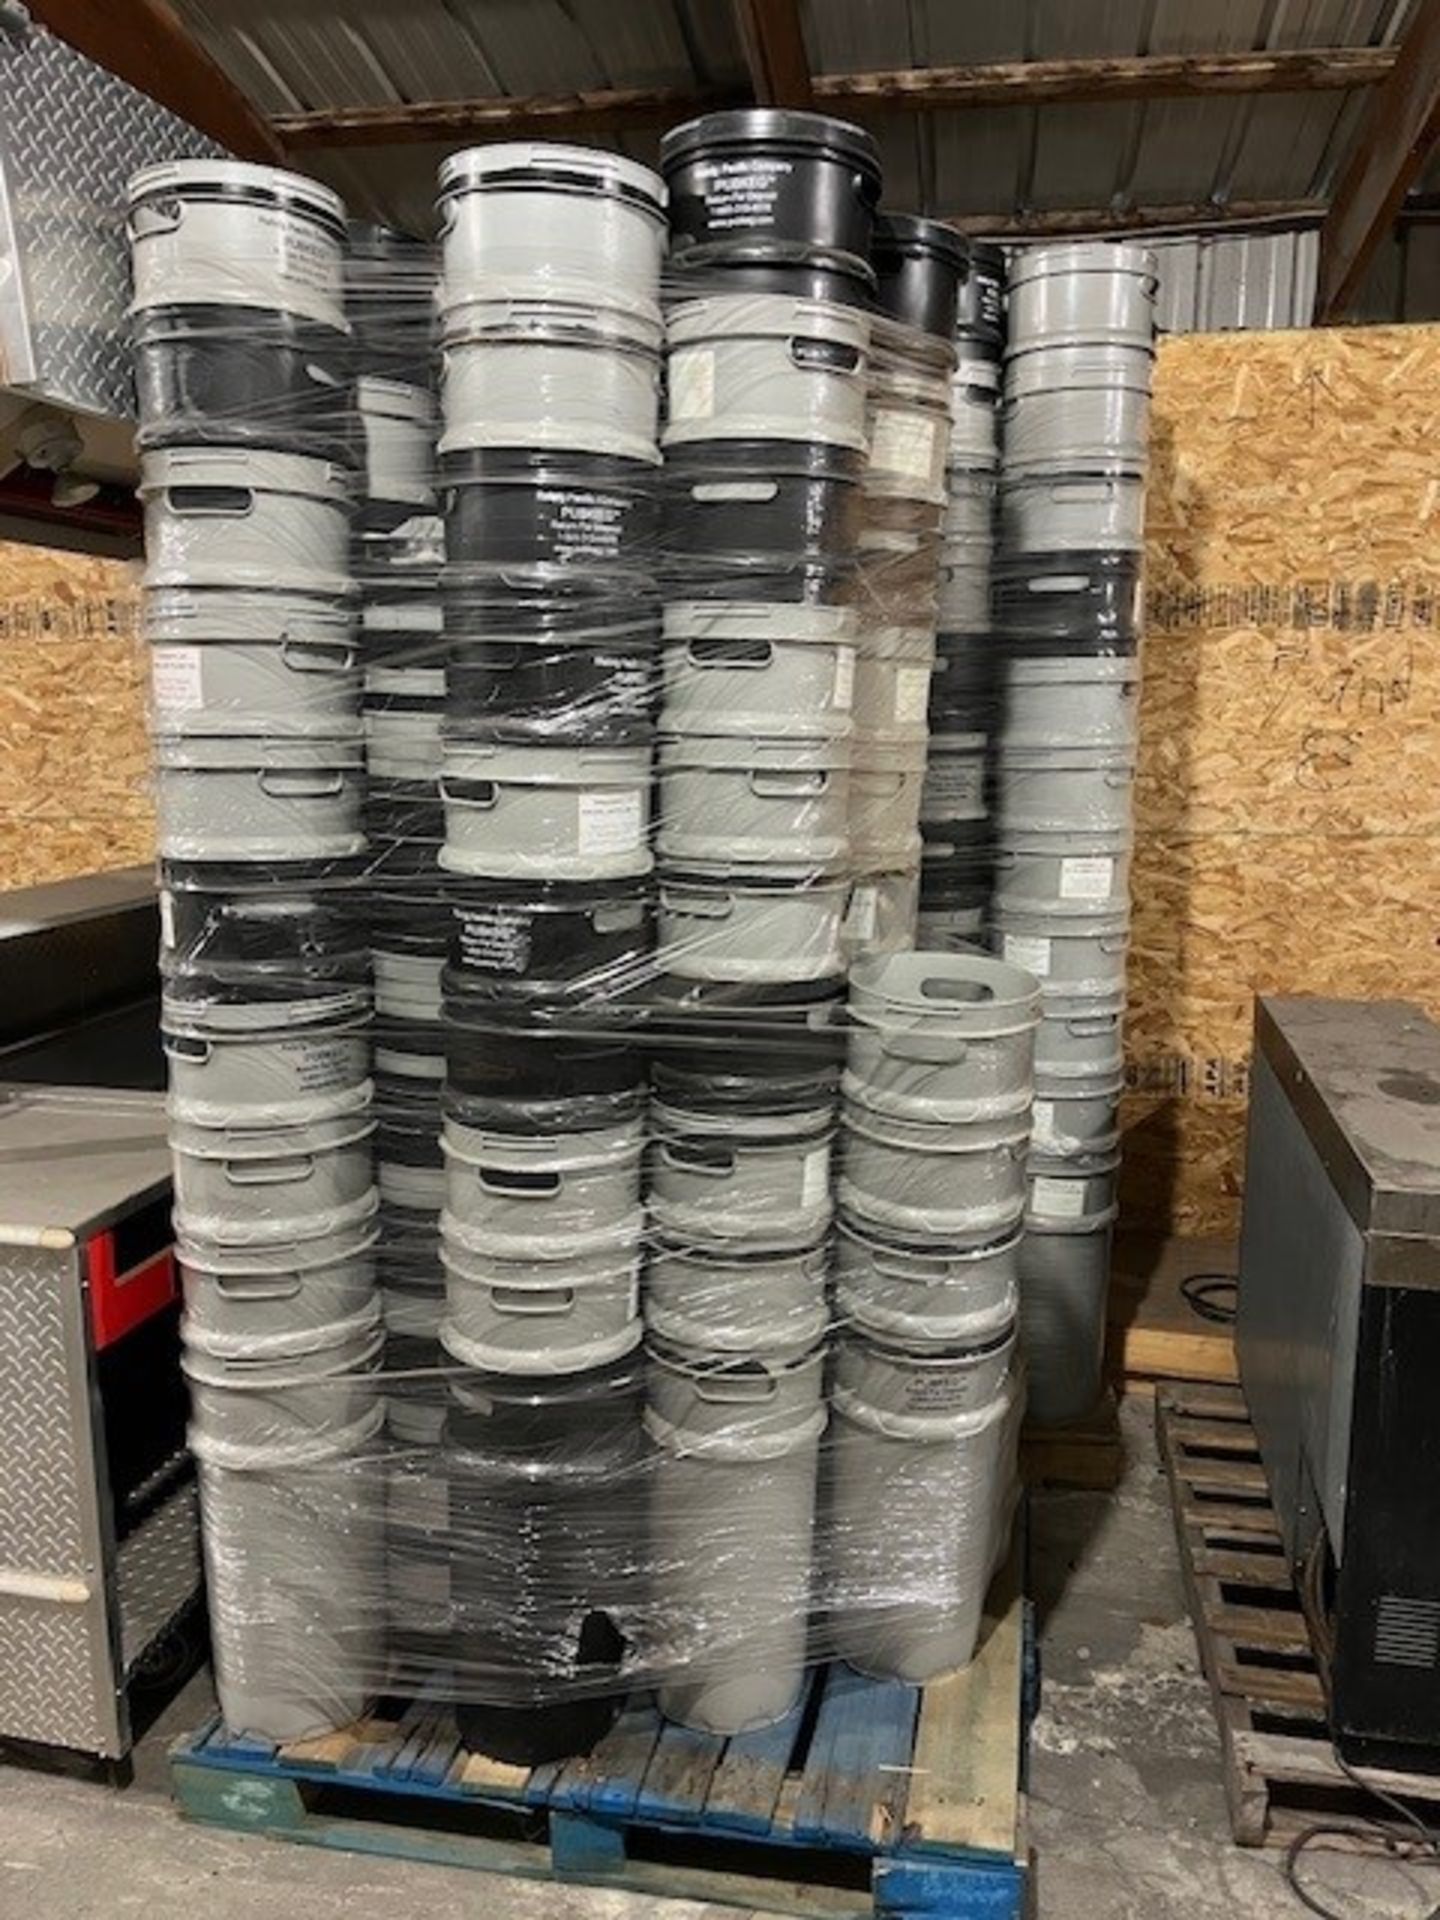 Consignment Item - located in Breese IL: Rehrig Pacific pubkegs